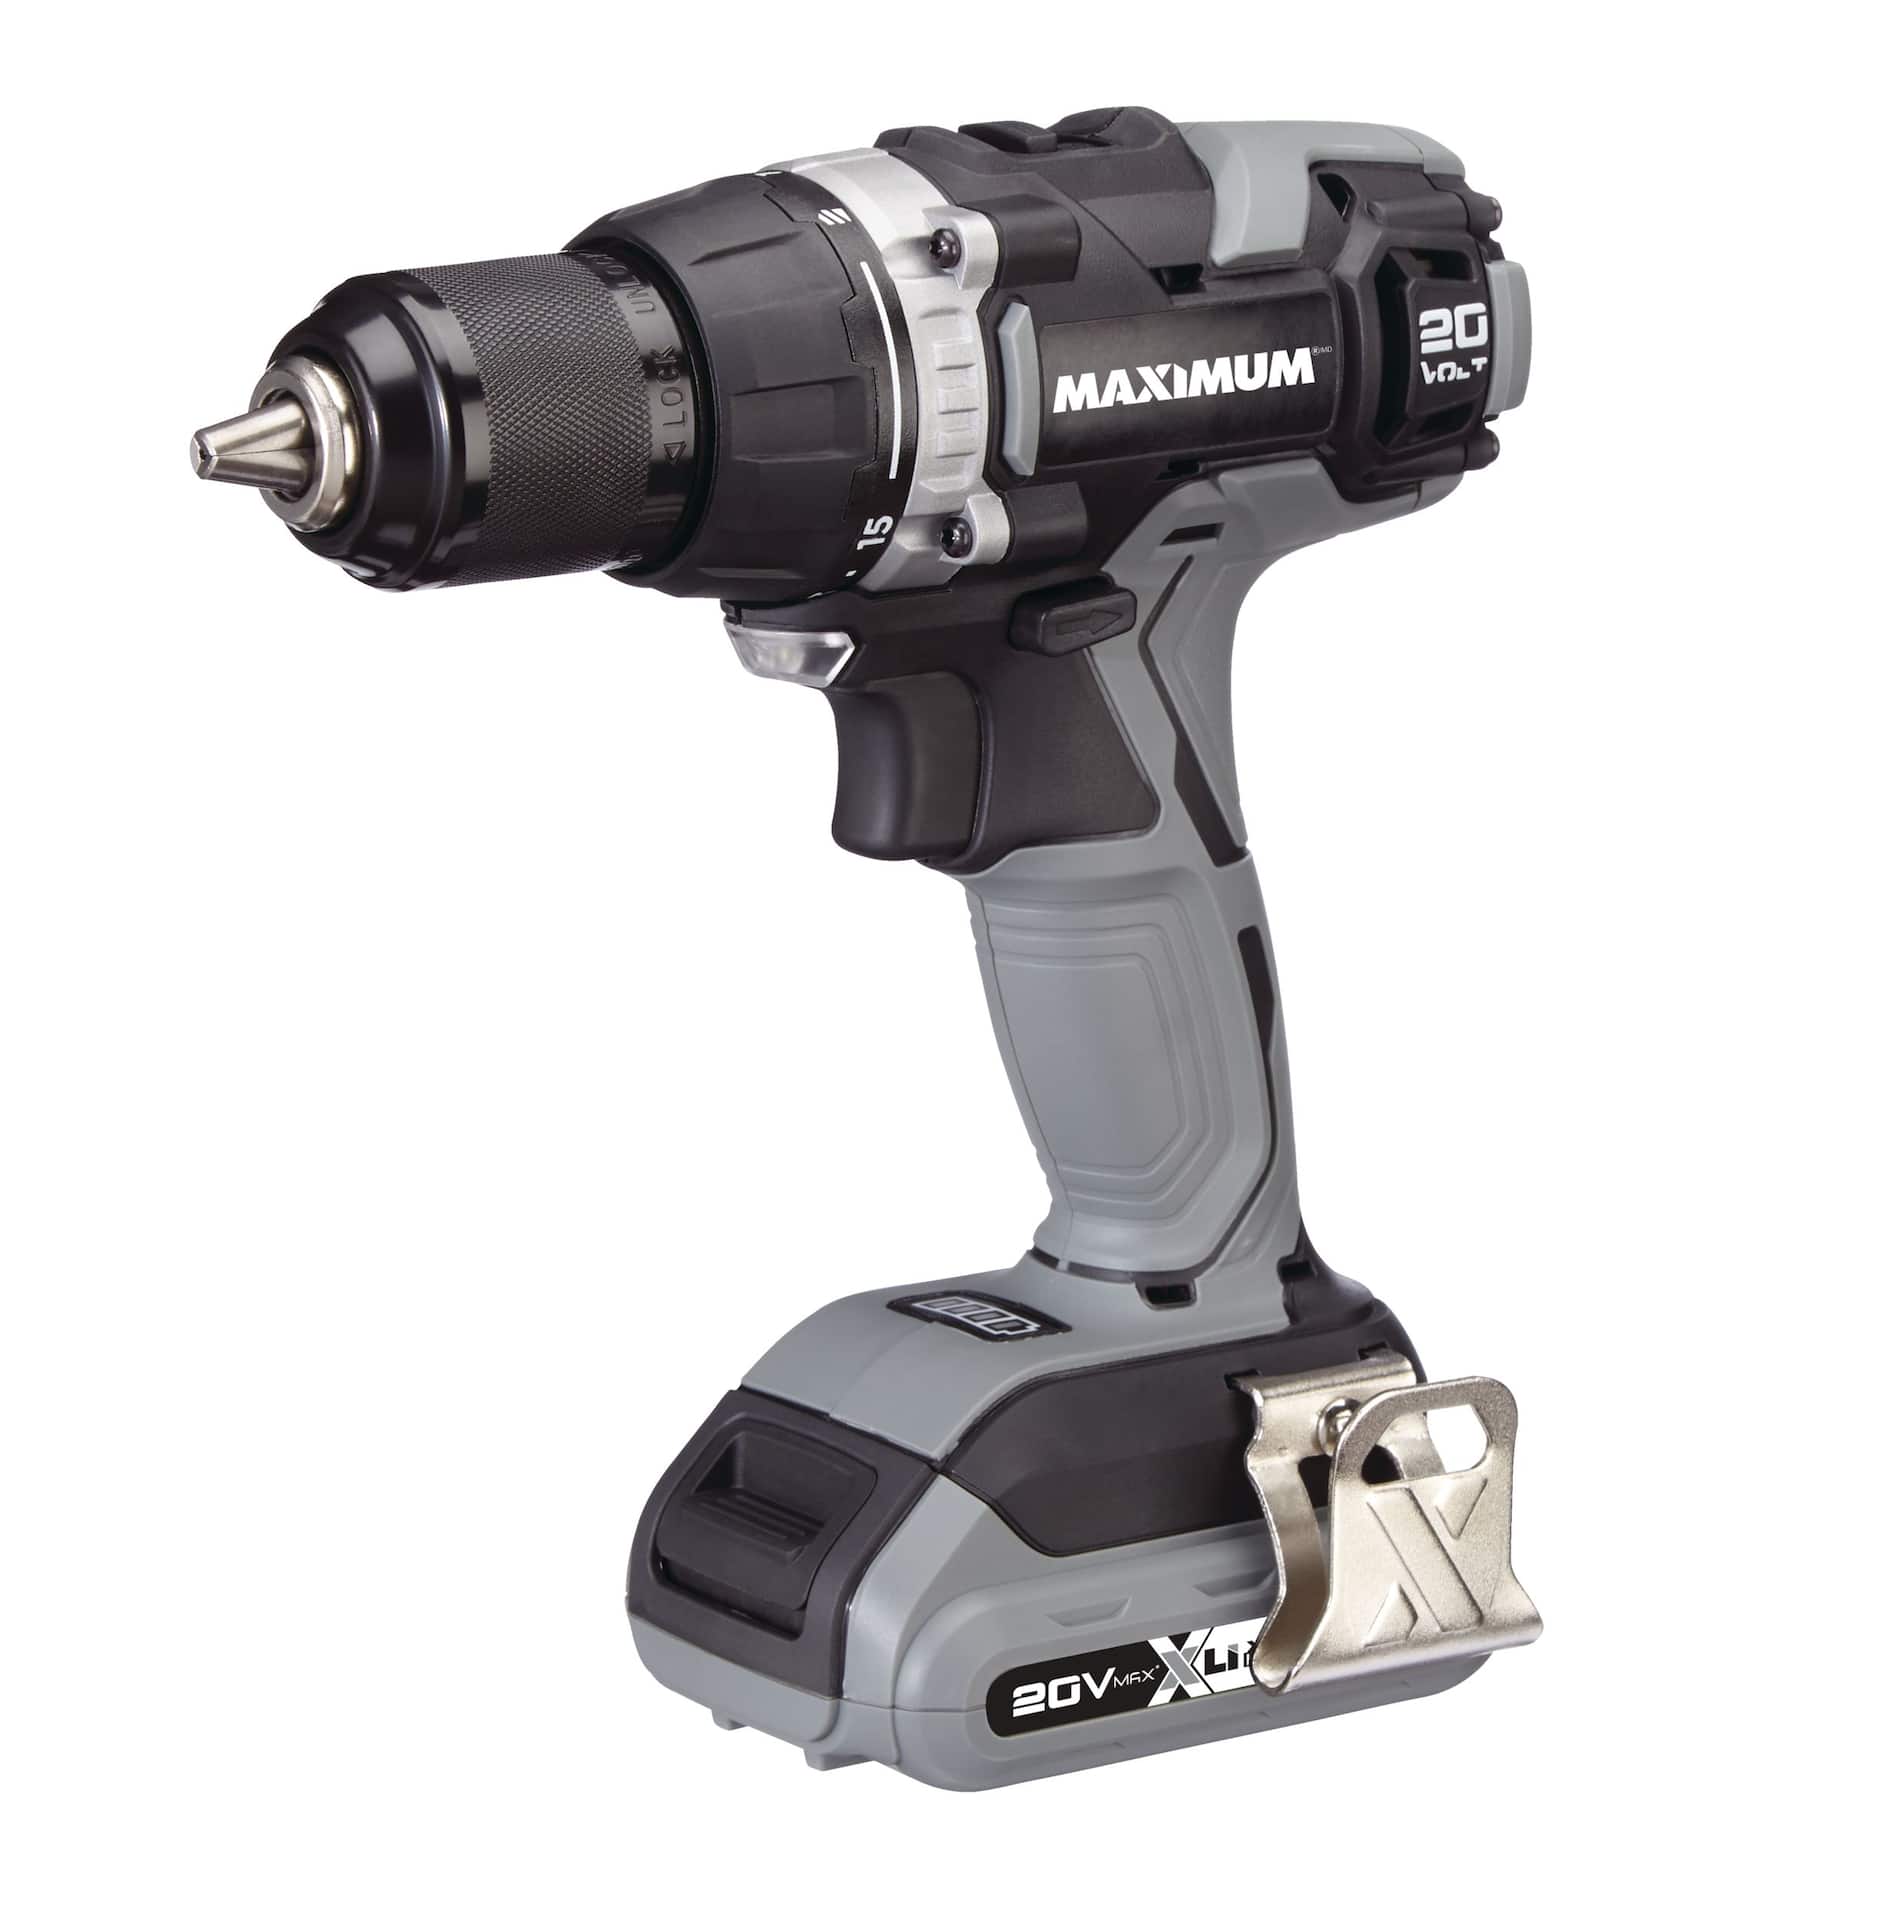 MAXIMUM 20V Max Lithium-Ion Keyless Cordless Drill/Driver with Battery &  Charger, 1/2-in